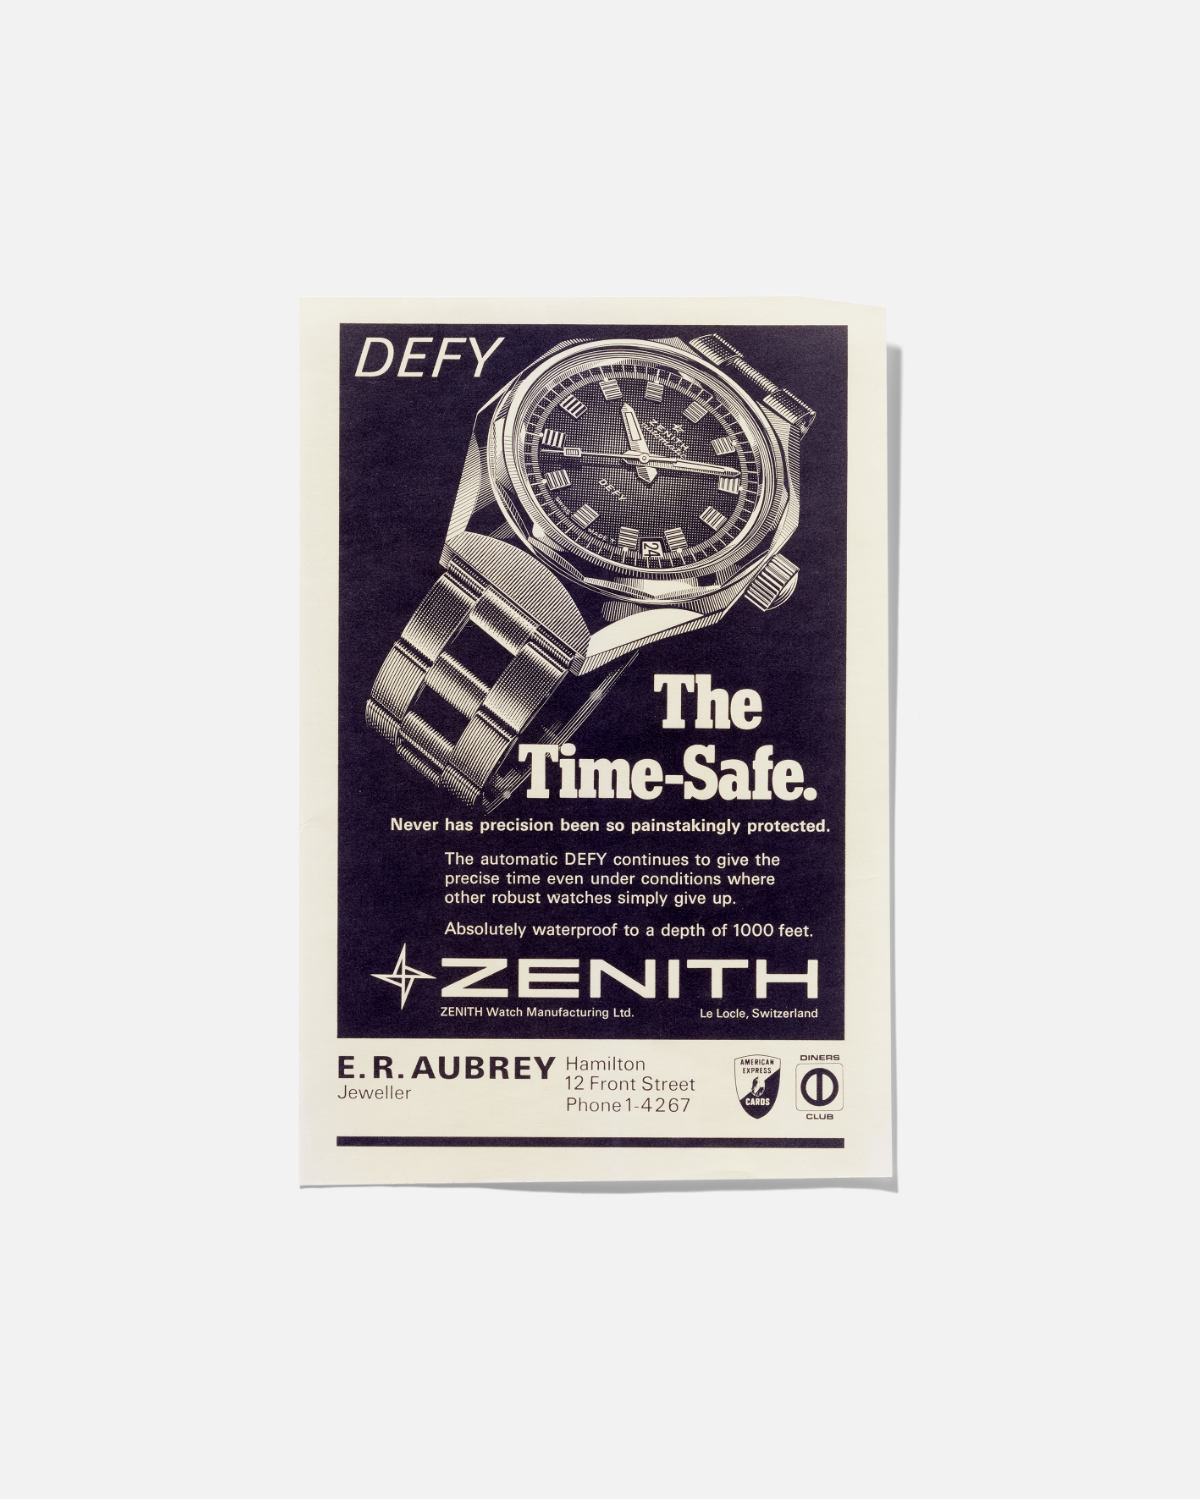 A Return To Form: Zenith Revives The Very First Defy Model From 1969